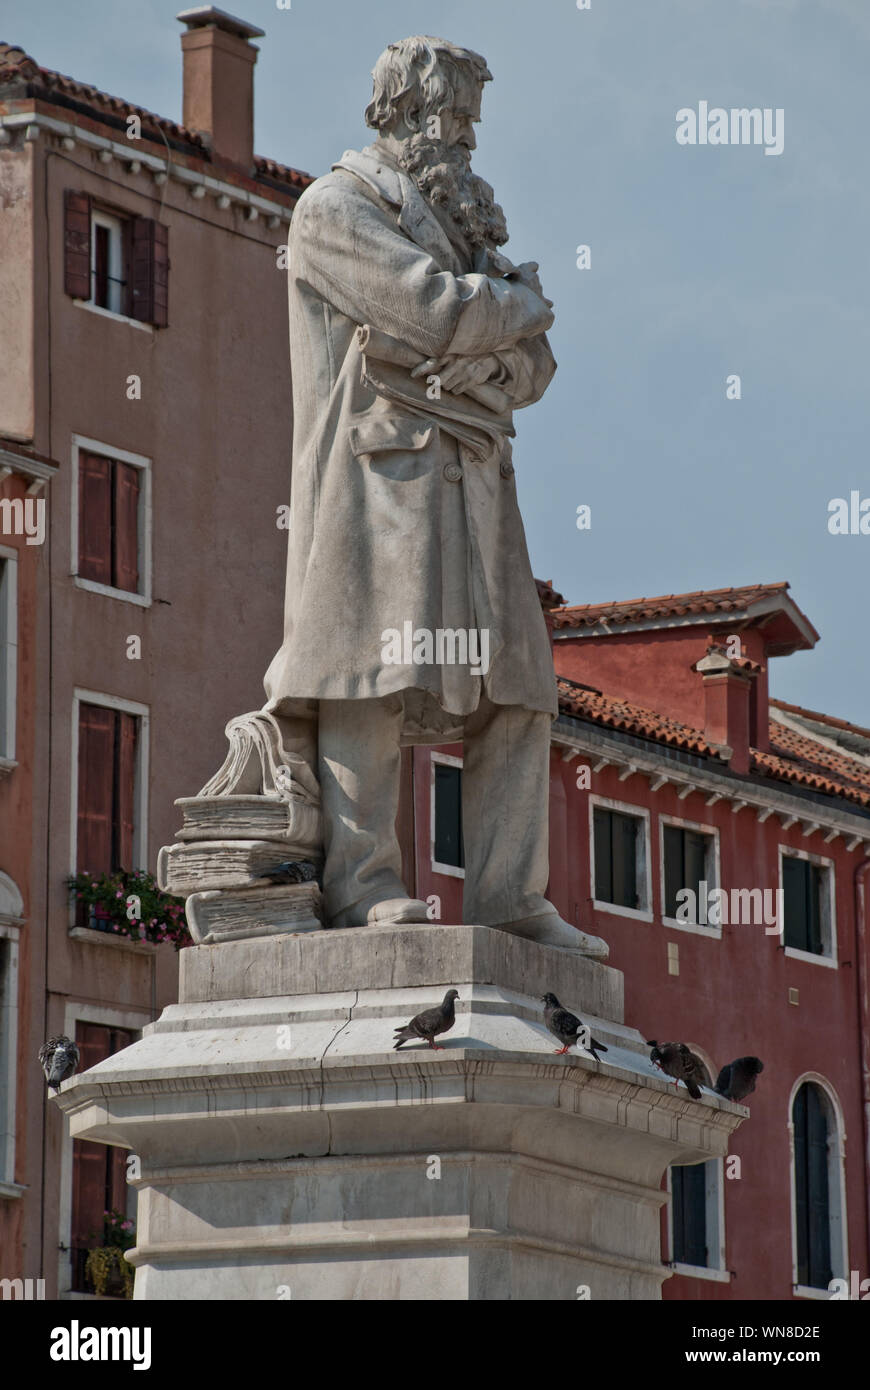 Venice, Italy: Statue of Niccolo Tommaseo at Campo Santo Stefano. He was was an Italian linguist, journalist and essayist Stock Photo